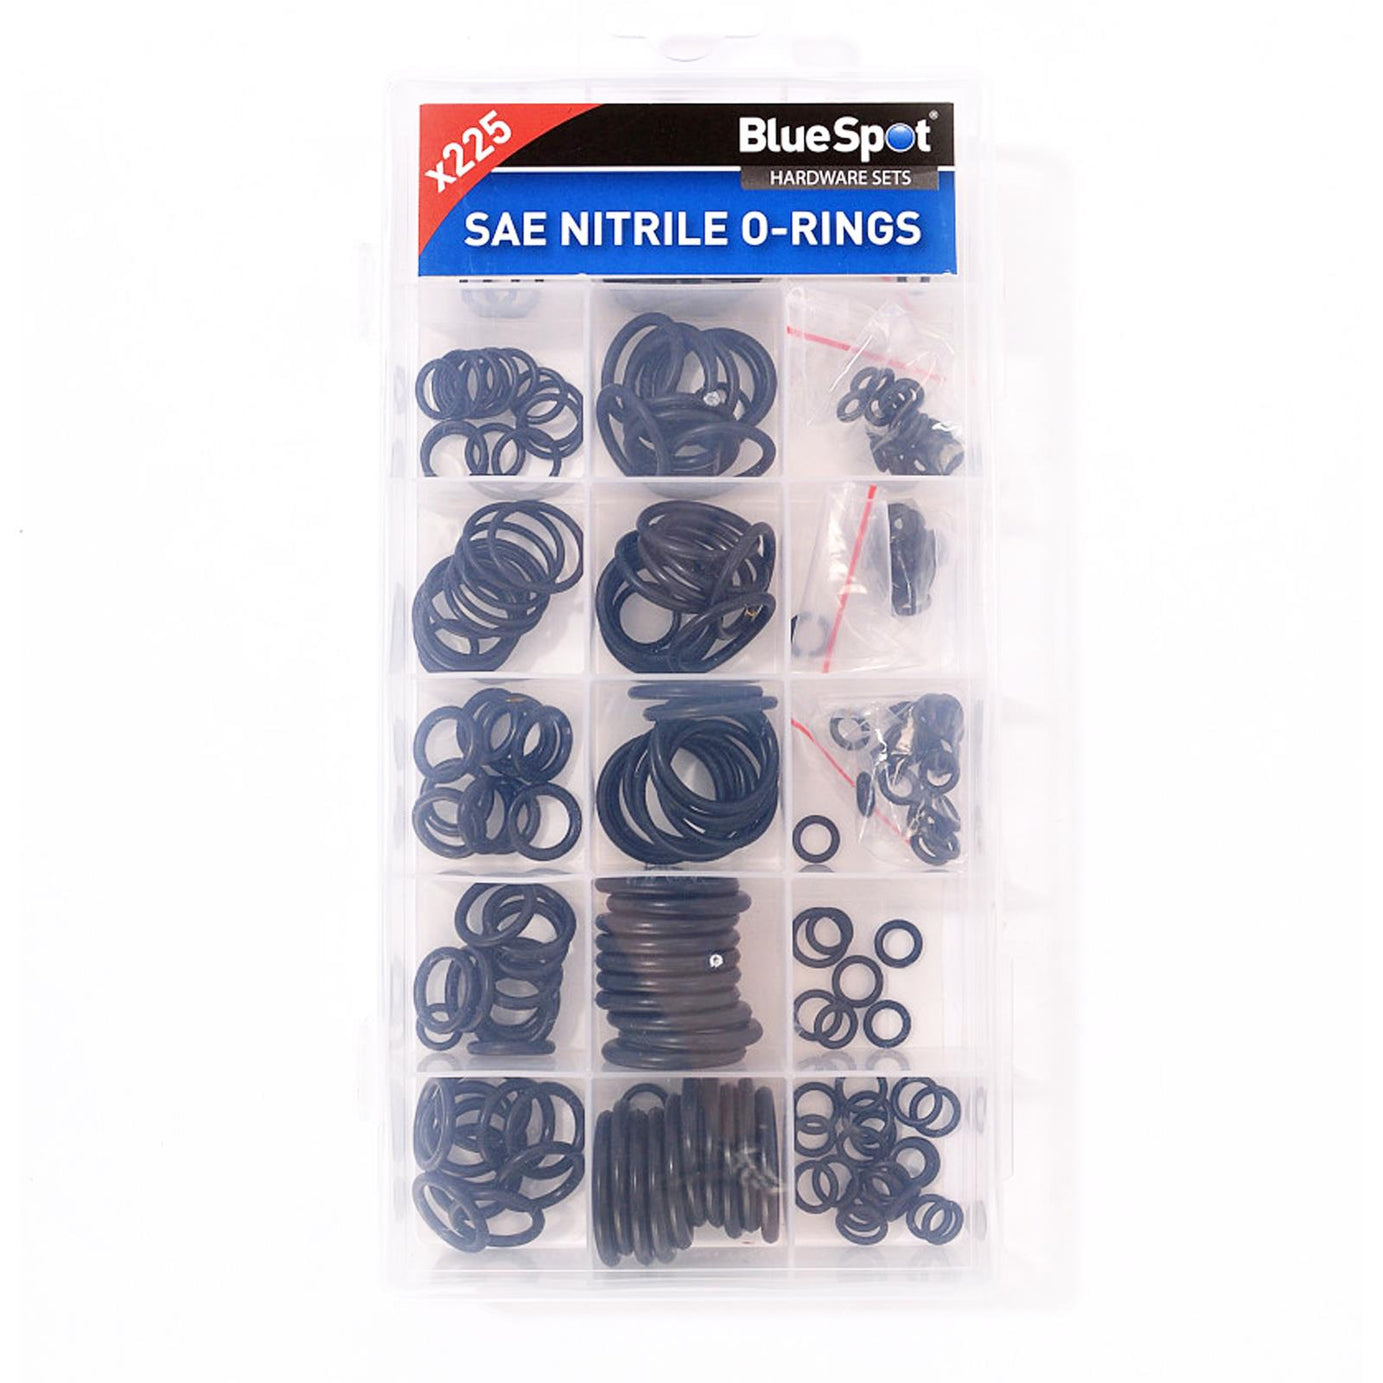 225 x Nitrile O-Ring Seals, Tap Washer Plumbing Gaskets for Air & Liquids